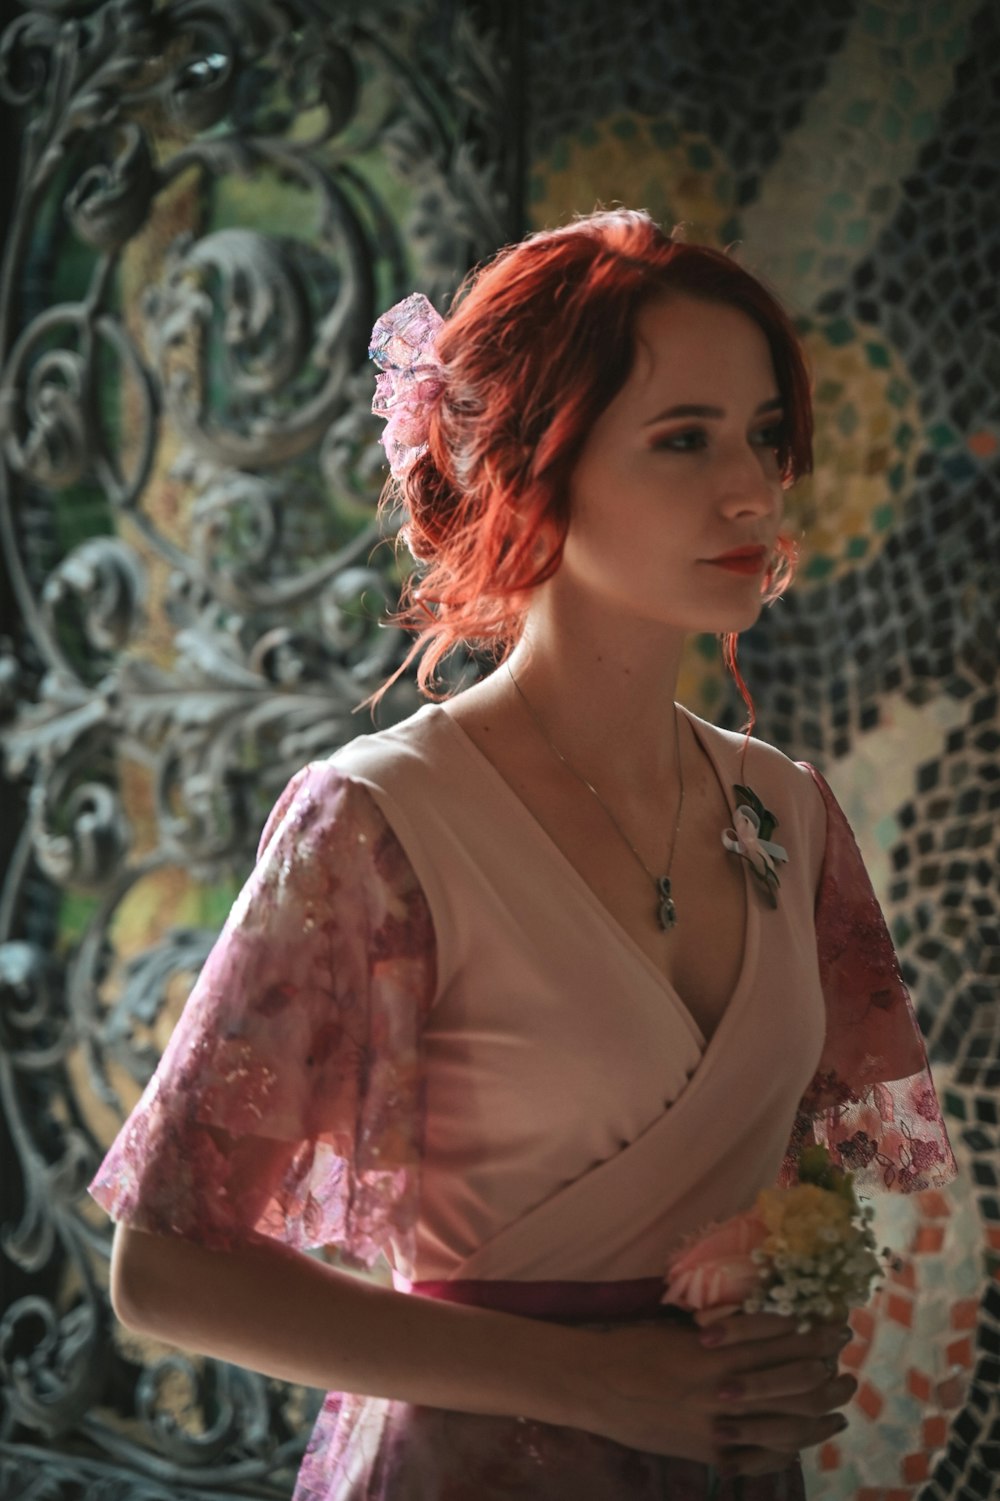 a woman with red hair wearing a pink dress